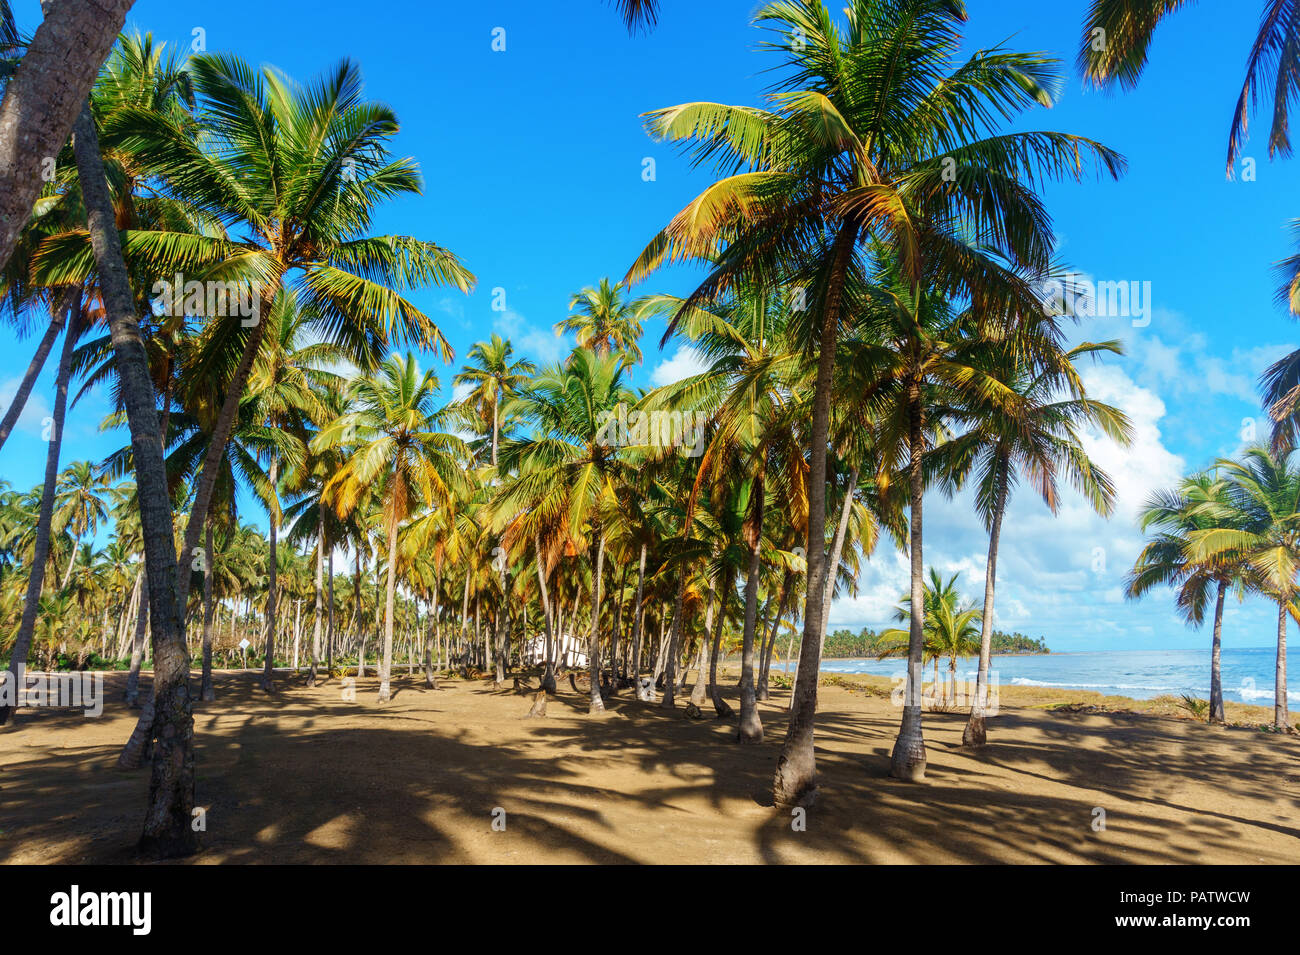 palm grove on the shore of the ocean on blue sky background. Dominican Republic Stock Photo